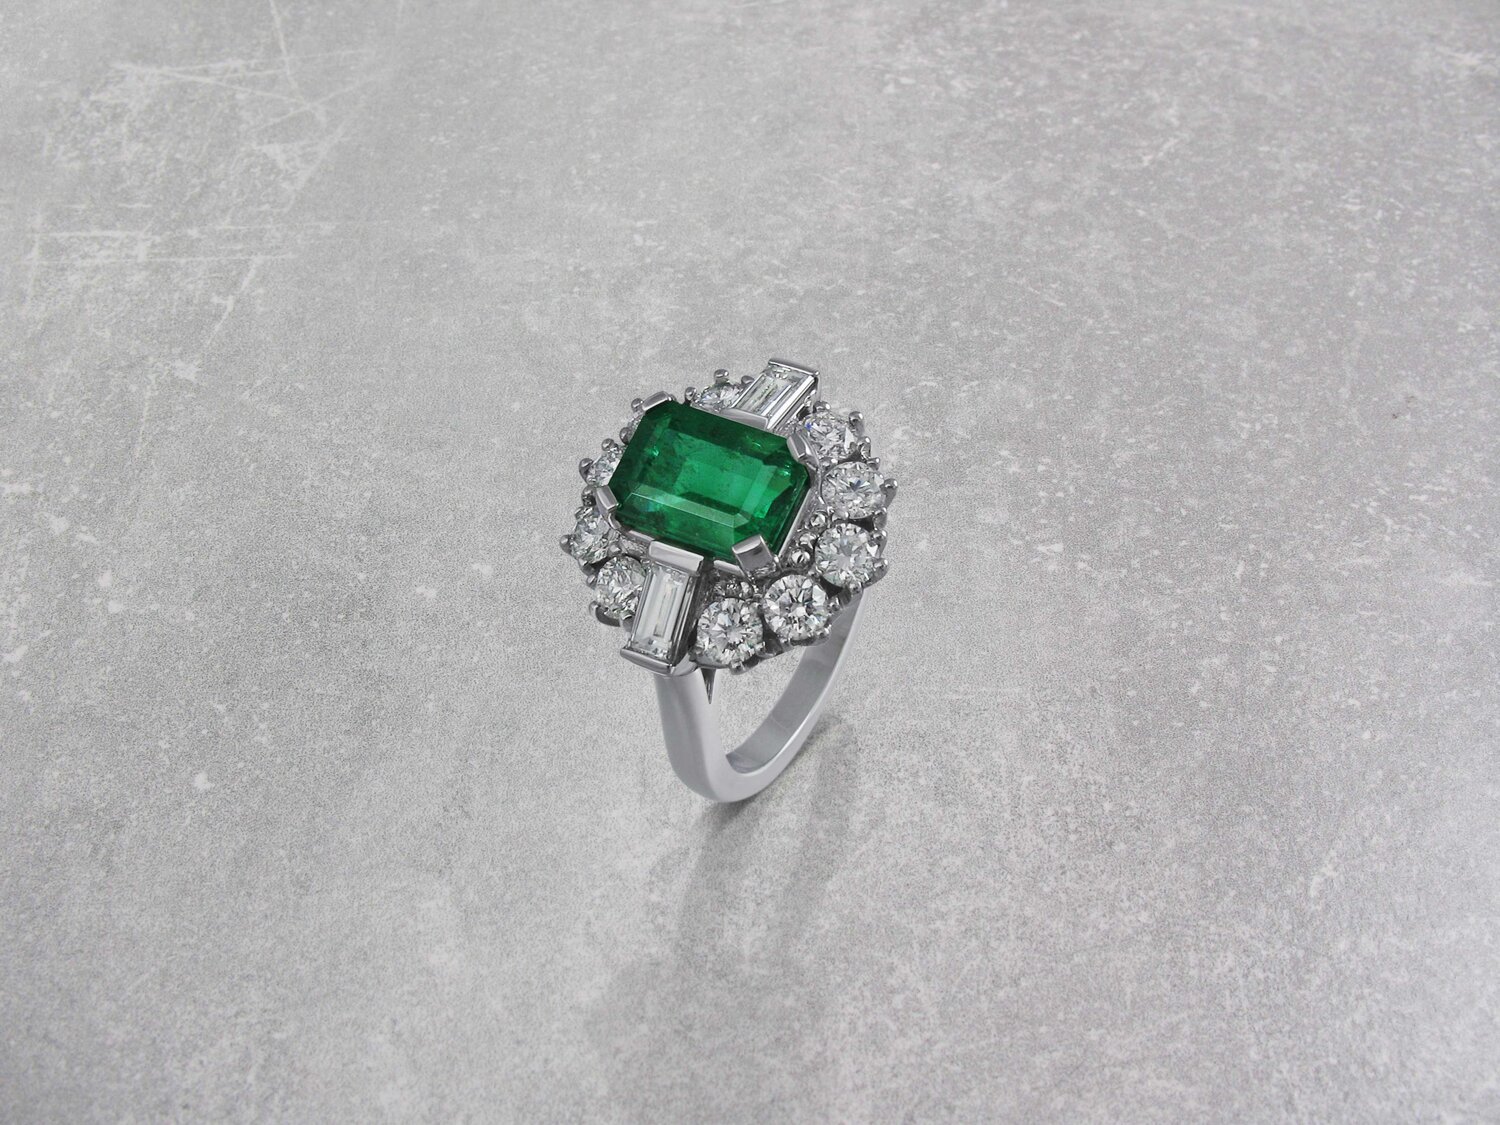 Emerald vintage style cluster ring